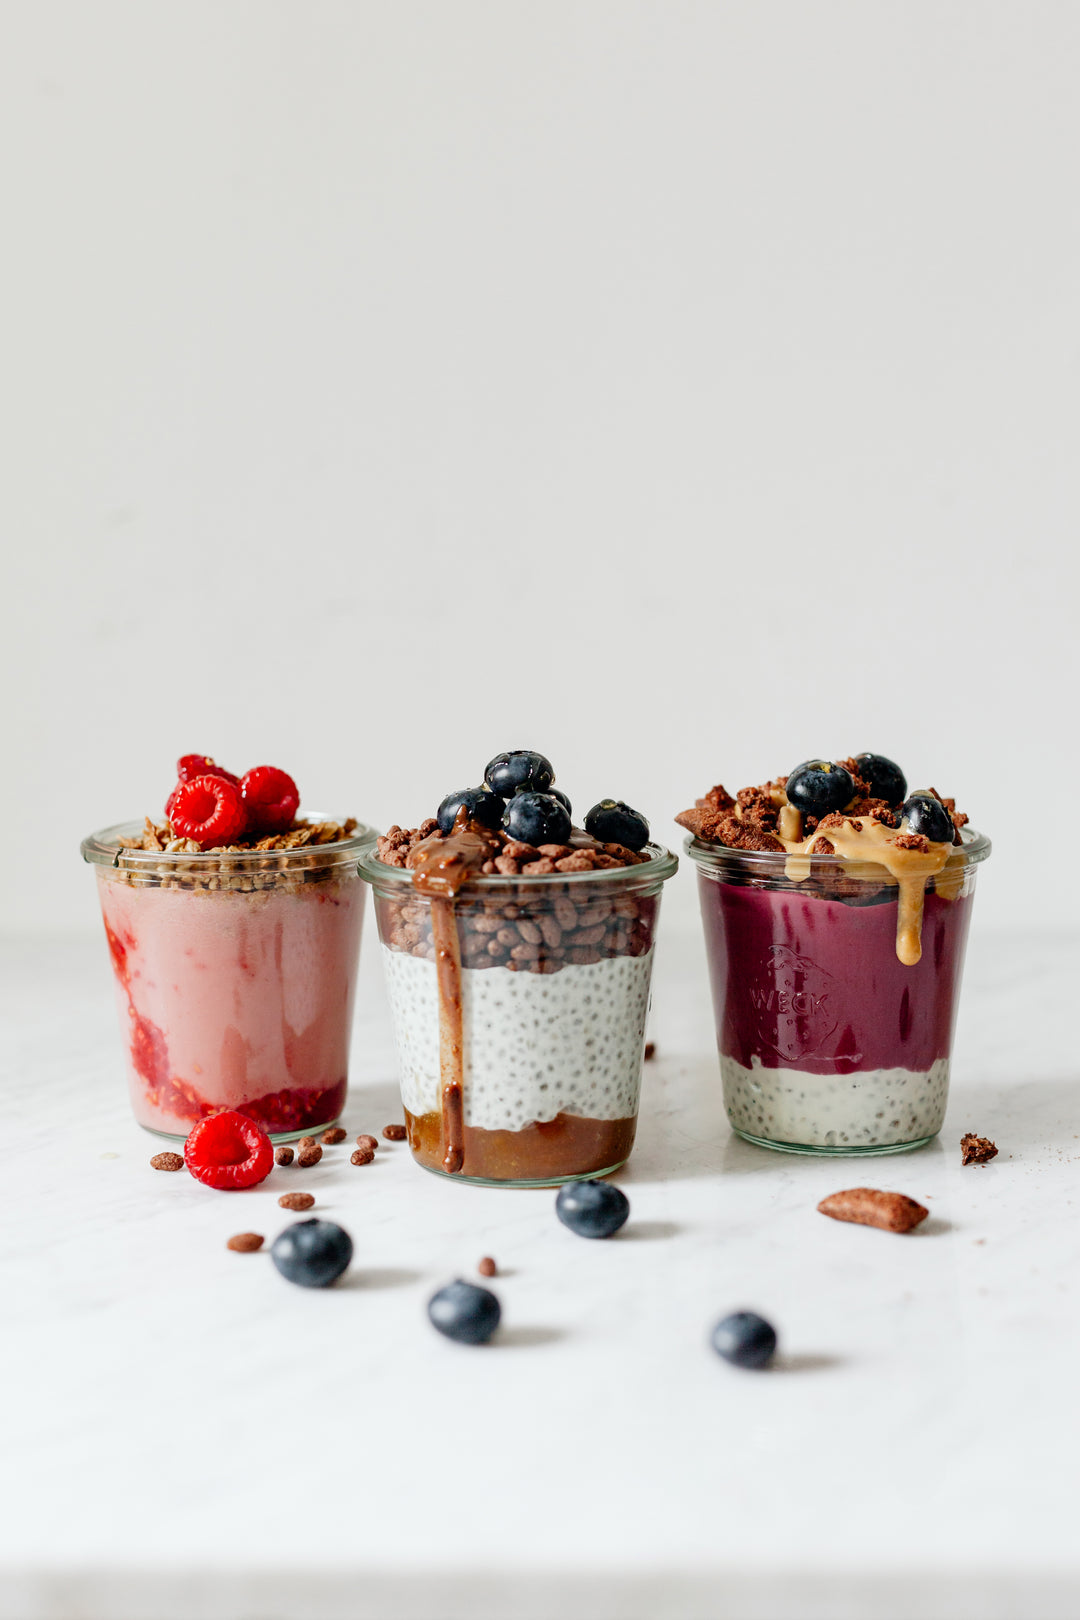 Three healthy smoothie and chia pudding parfait options with toppings of fresh fruit, cereals, granola and nut butter